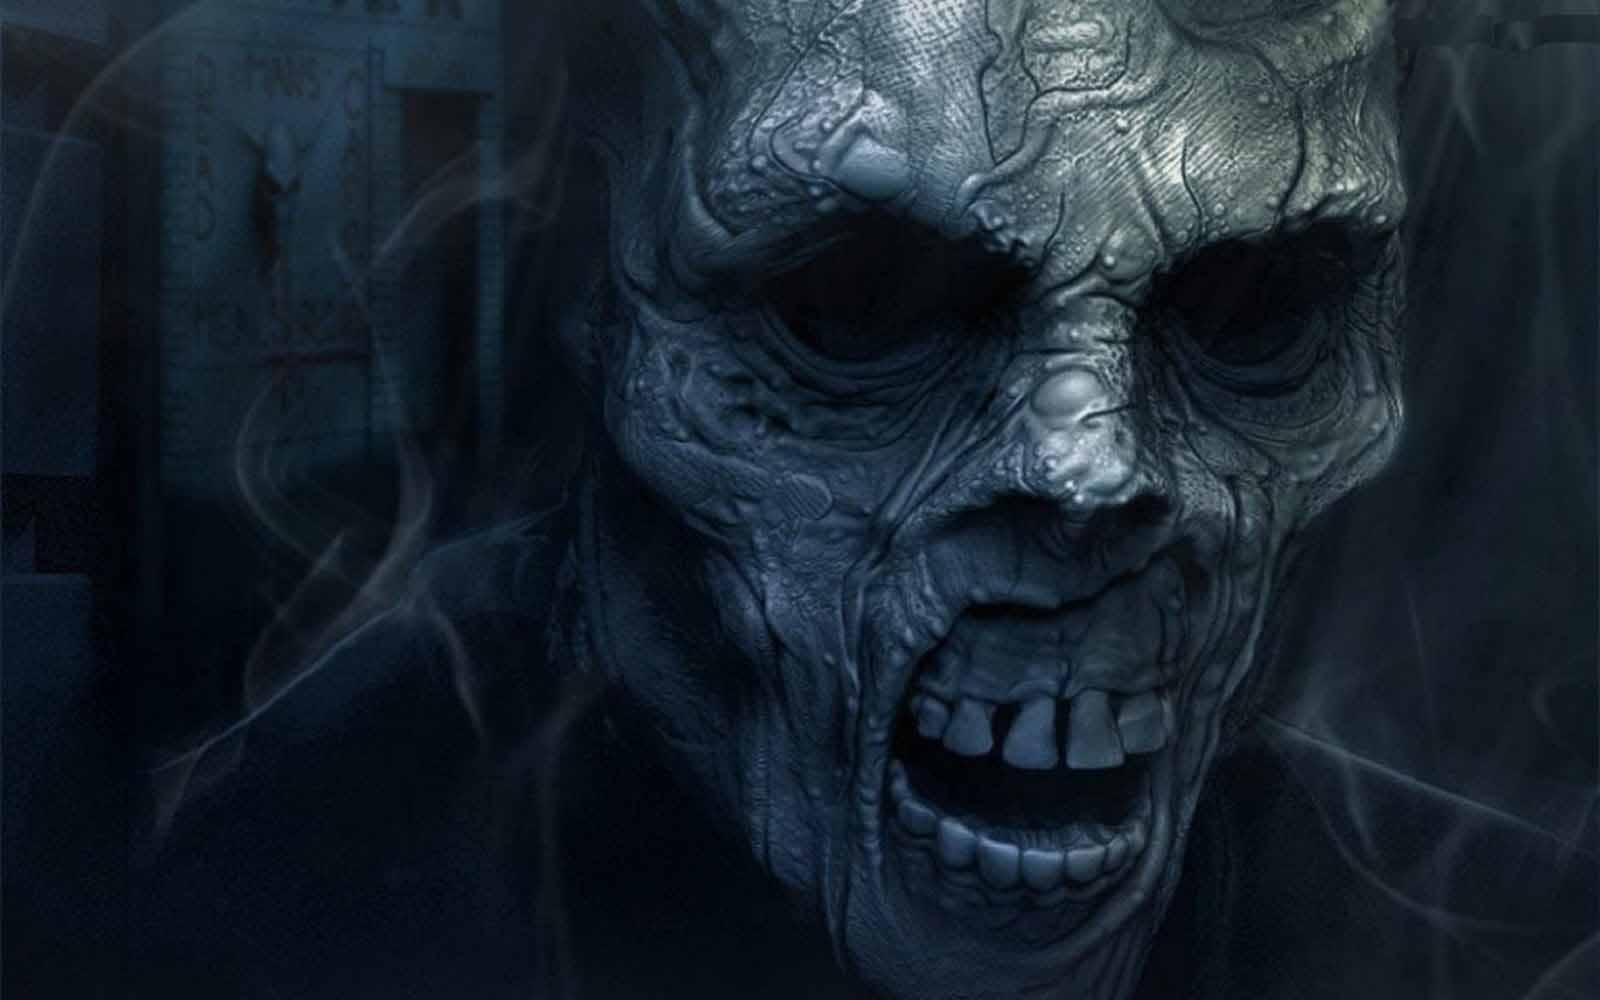 Zombies nazi free hd wallpapers | Wallpapers Wide Free